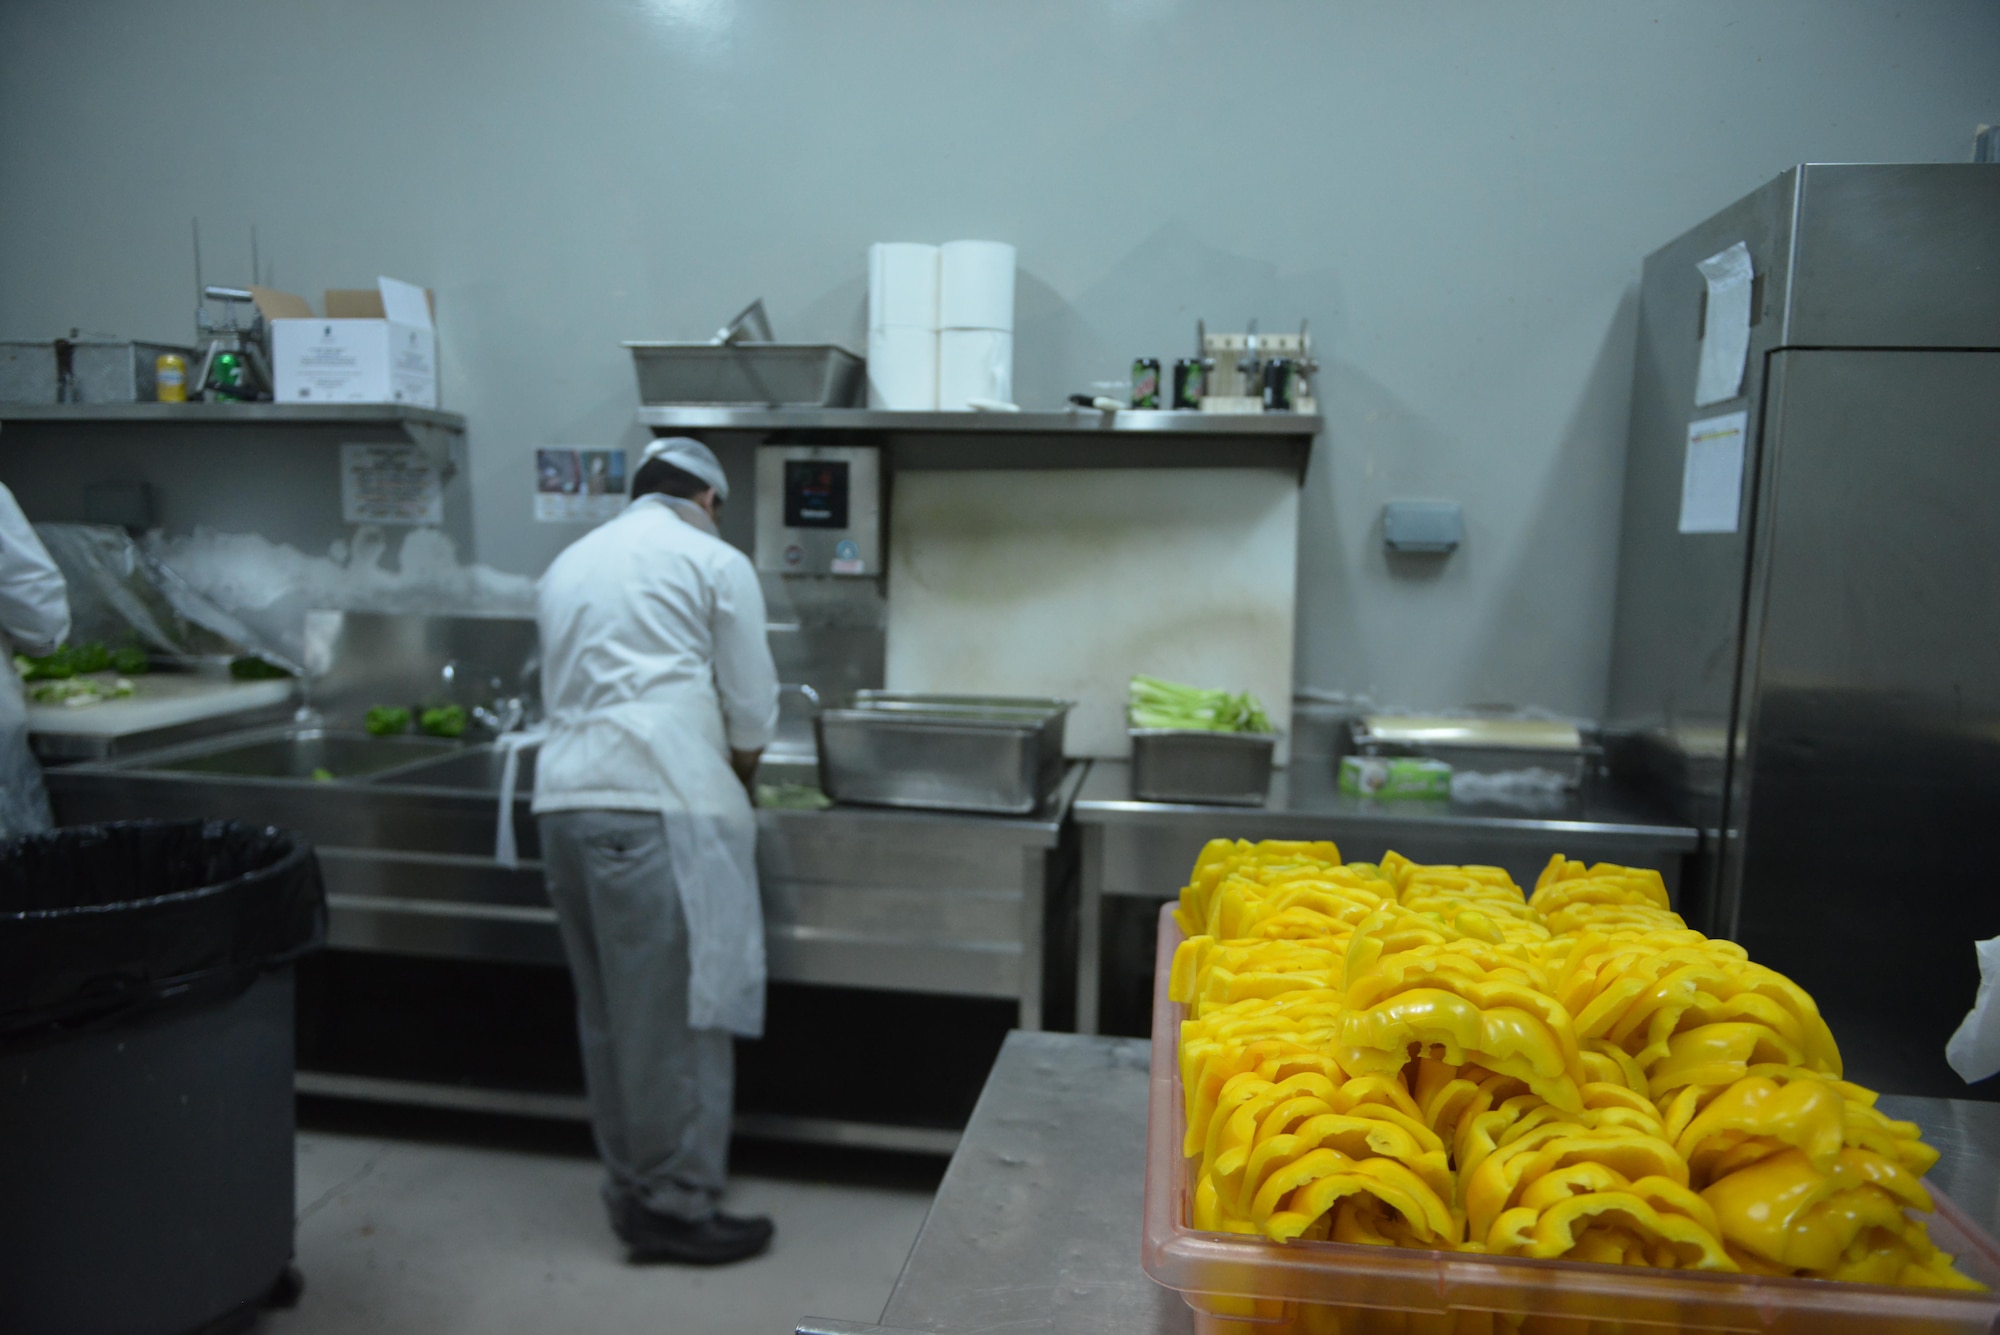 Dining facility cooks wash and cut vegetables to prepare the salad bar at the Independence Dining Facility at Al Udeid Air Base, Qatar July 21, 2015. (U.S. Air Force photo/Staff Sgt. Alexandre Montes)